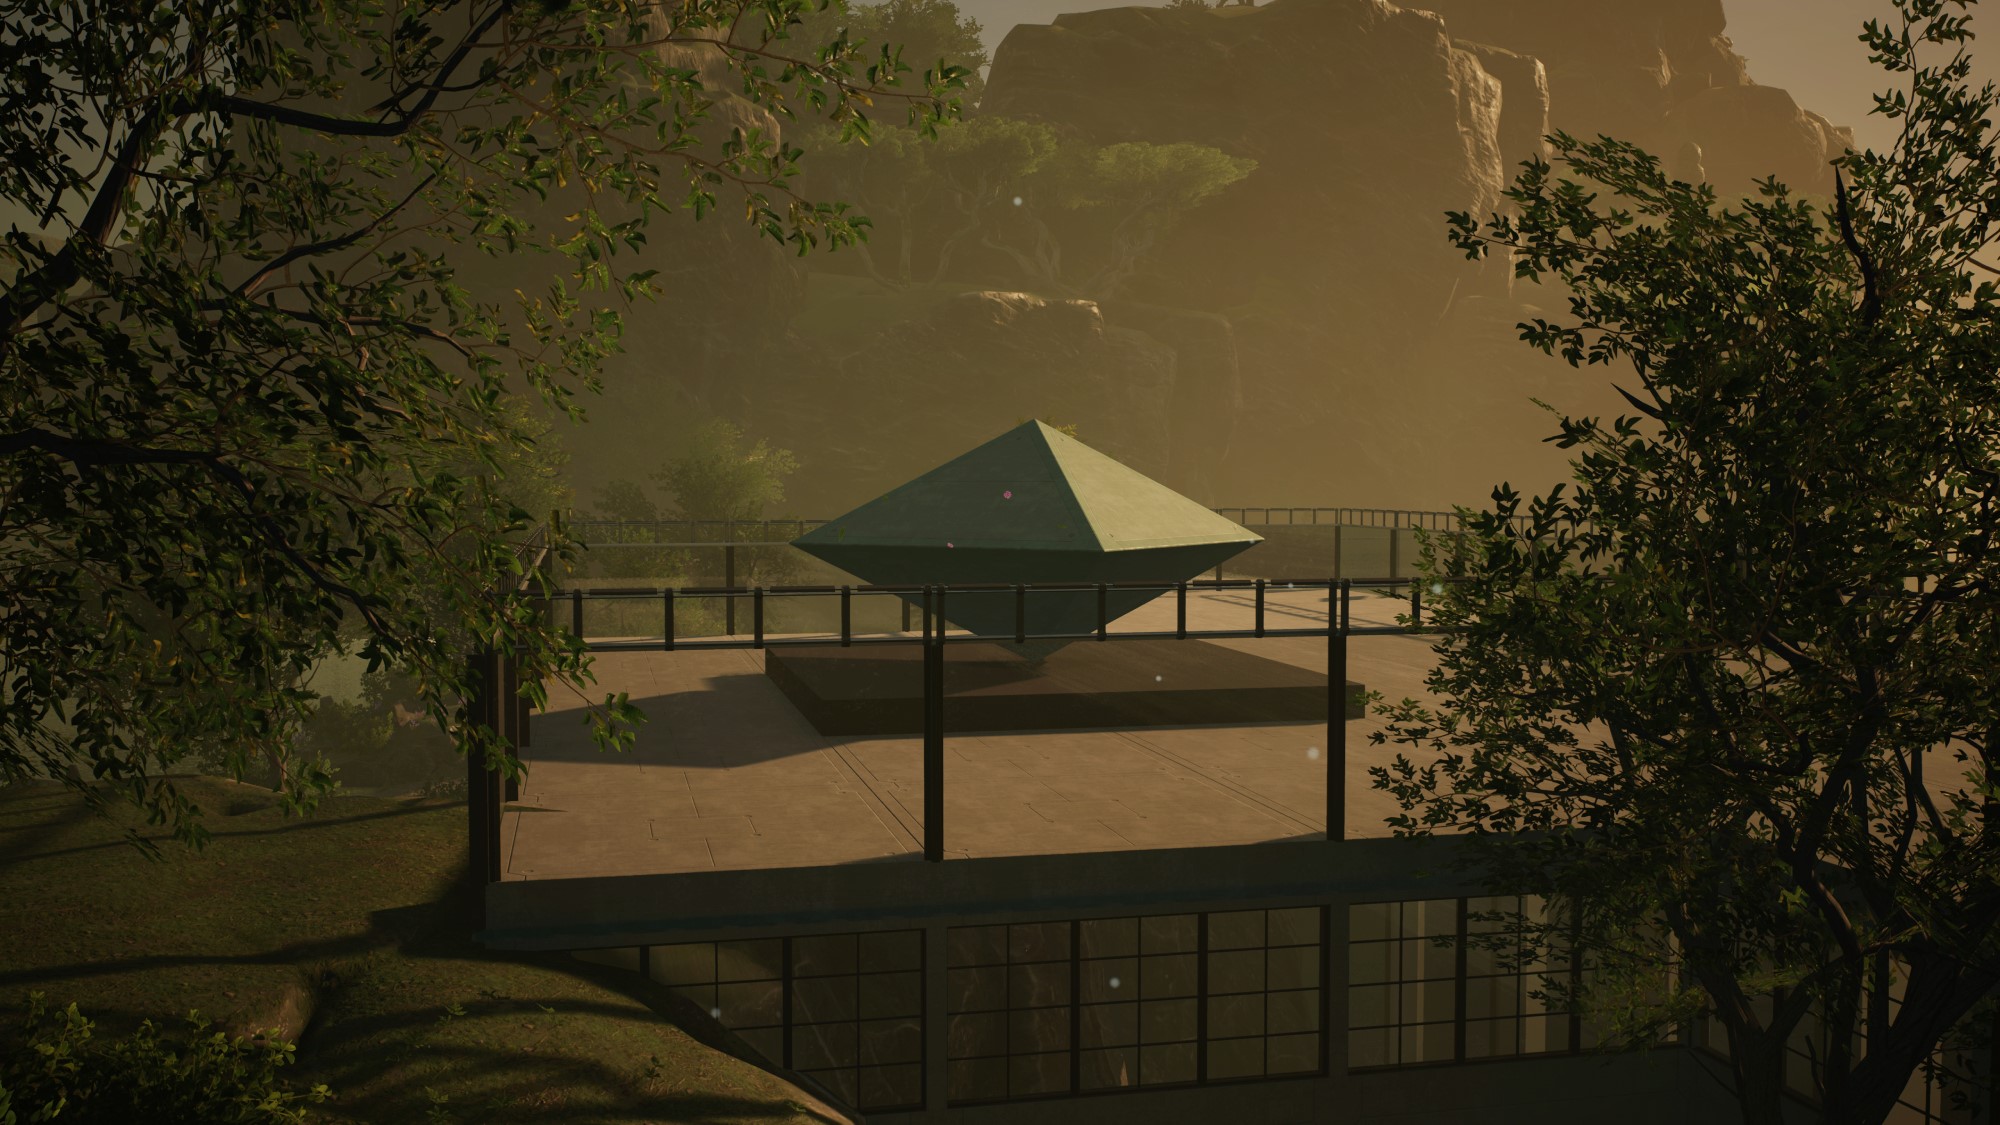 Virtual photograph of a modern concrete and glass building in a forest. From the game Satisfactory.